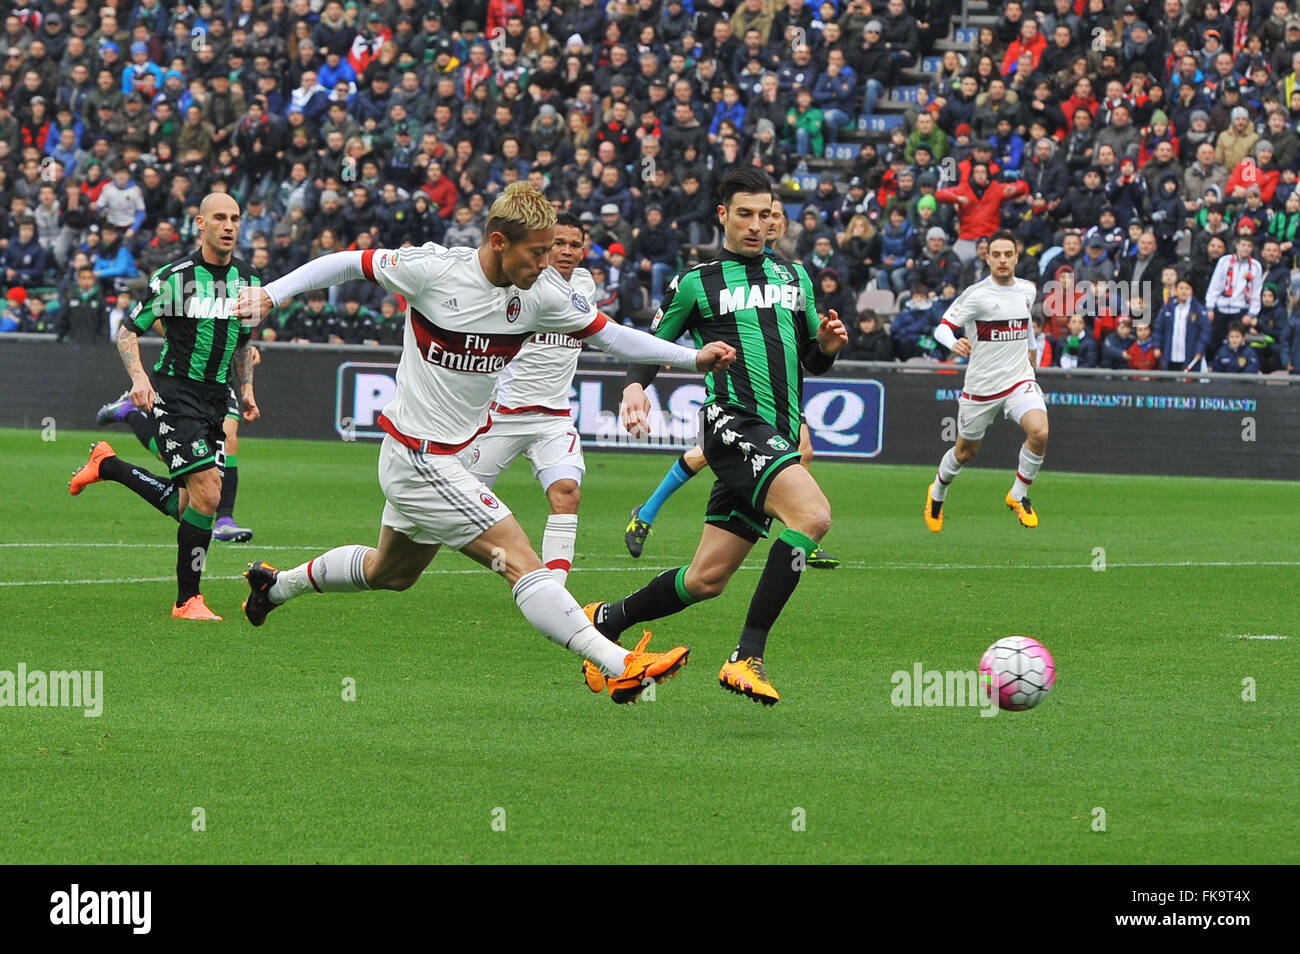 Reggio Emilia, Italy. 06th Mar, 2016. Keisuke Honda Milan's forward and national team of Japan during the Serie A football match between Sassuolo and AC Milan at Mapei Stadium in Reggio Emilia. US Sassuolo Calcio vs AC Milan Serie A football championship 2015/2016. US Sassuolo Calcio wins 2 - 0 over AC Milan. Joseph Alfred Duncan and Nicola Domenico Sansone are the scorers. Credit:  Massimo Morelli/Pacific Press/Alamy Live News Stock Photo